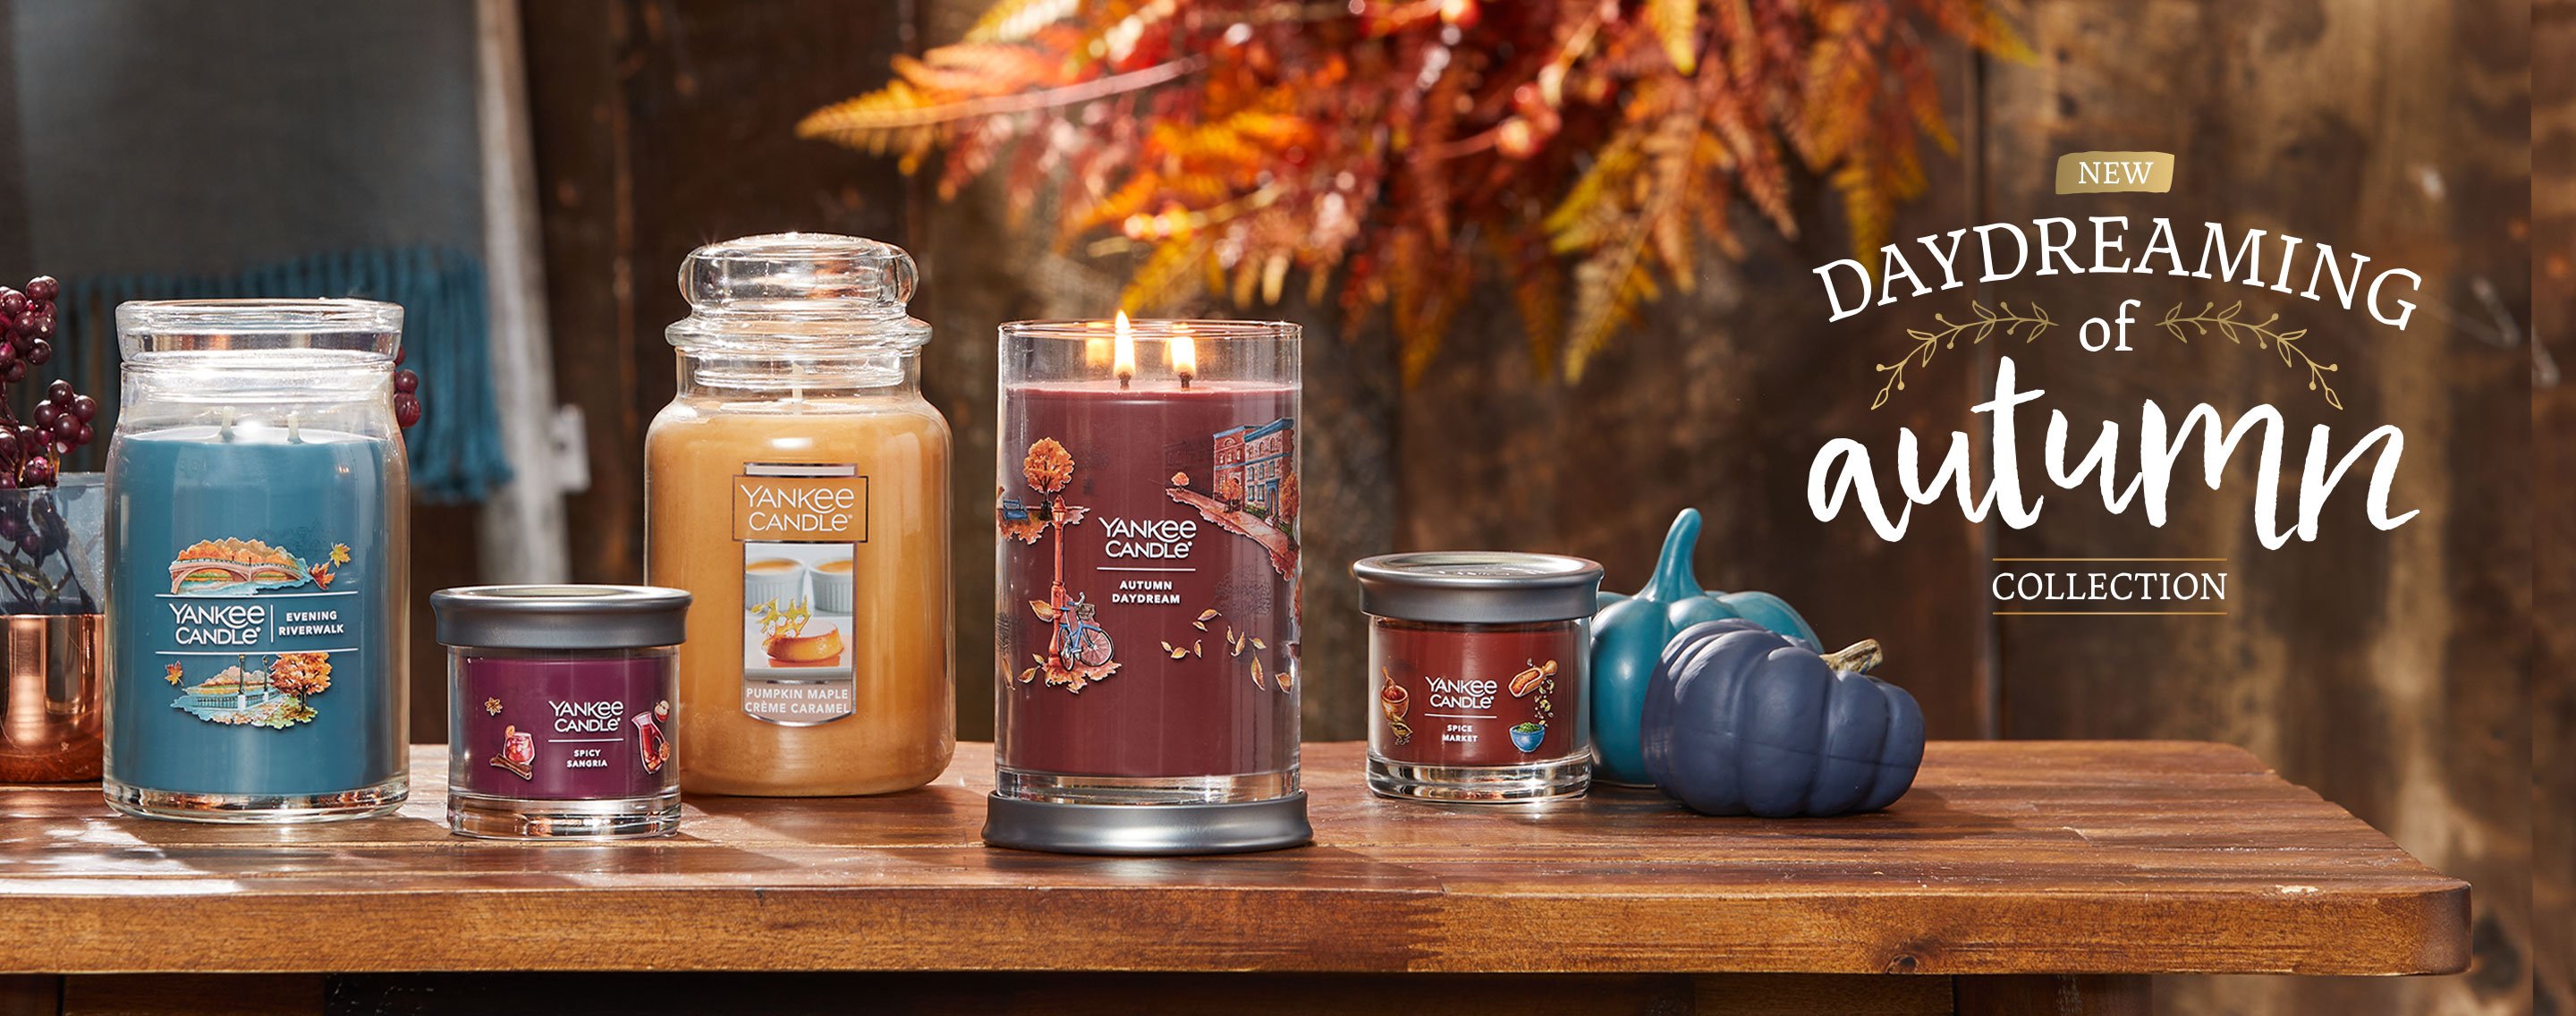 WoodWick Candle Fall Scents Are on Sale During  Prime Day – SheKnows